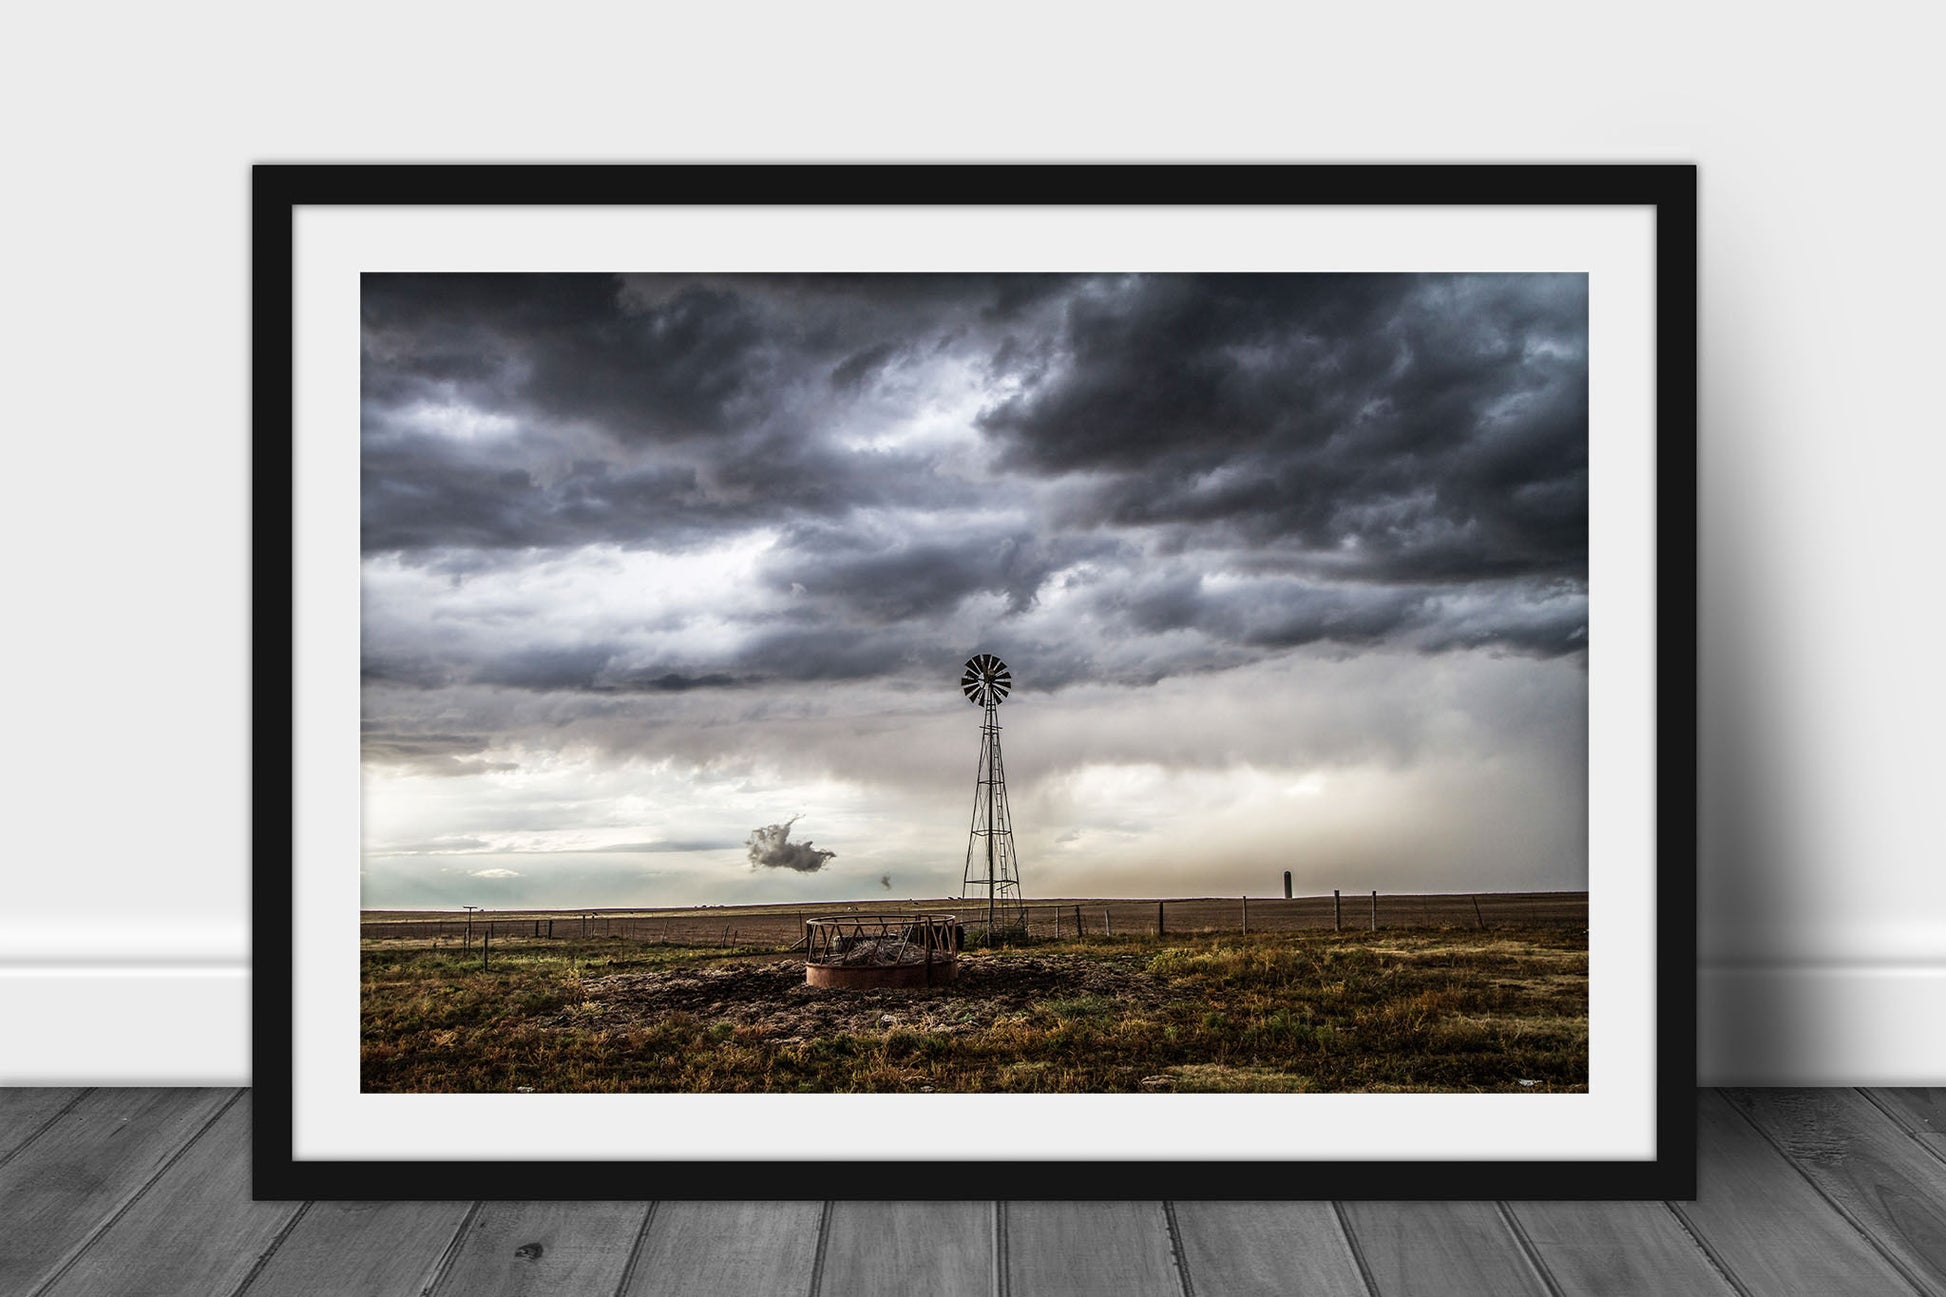 Framed and matted country print of an old windmill underneath a stormy sky on a spring day in the Oklahoma panhandle by Sean Ramsey of Southern Plains Photography.